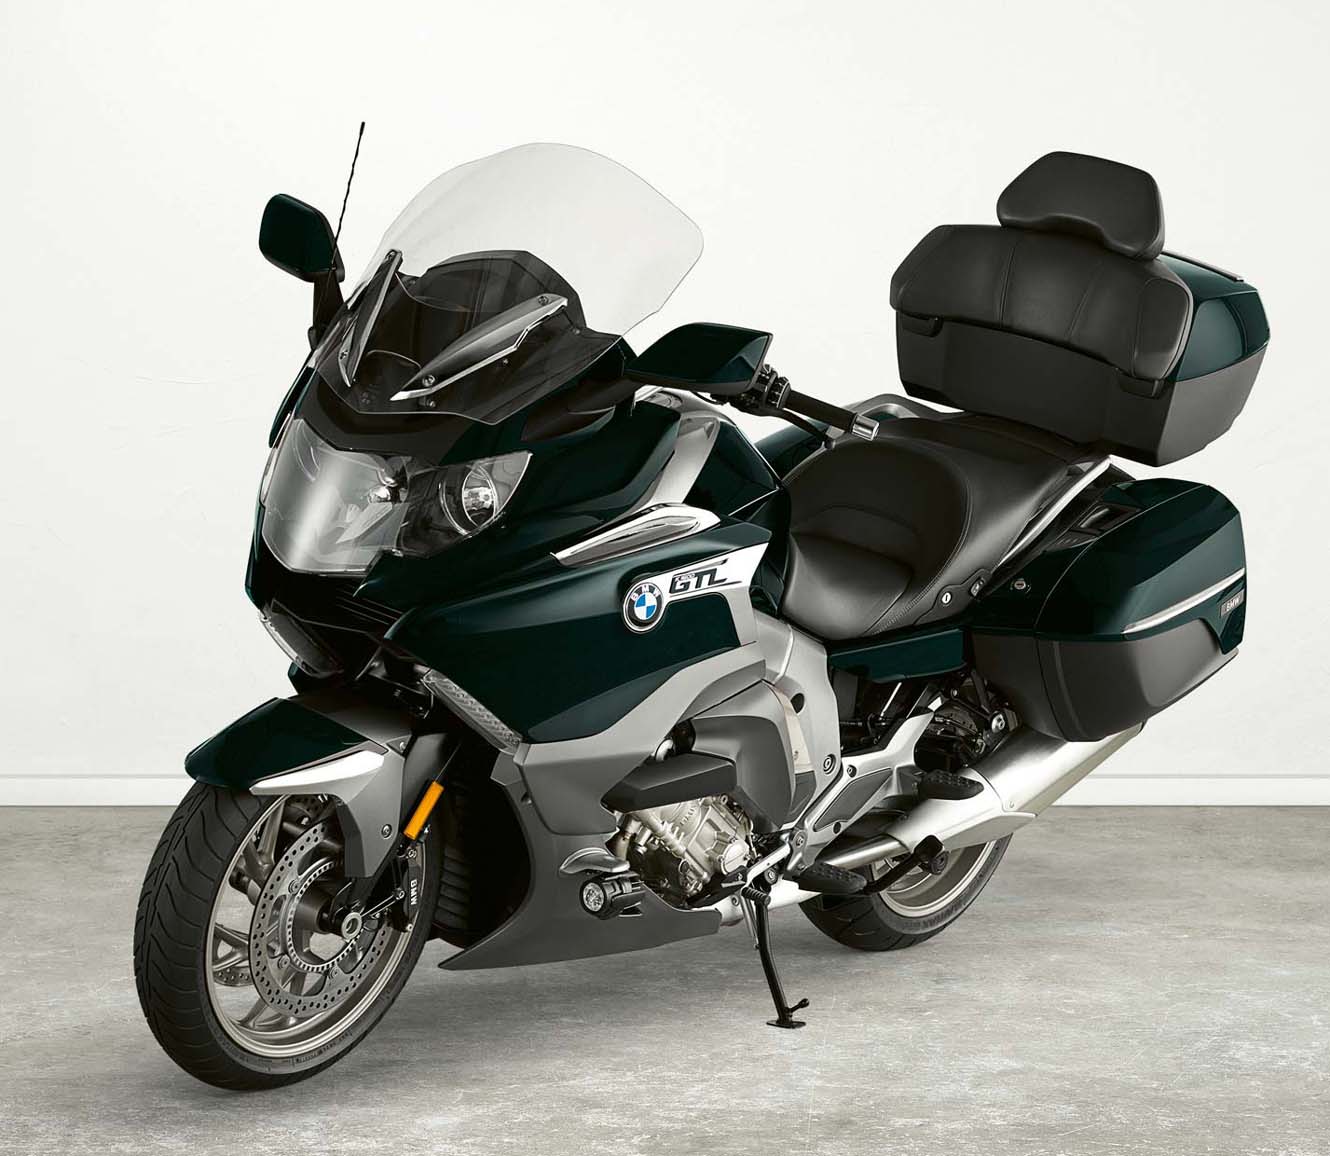 BMW K 1600 GTL technical specifications